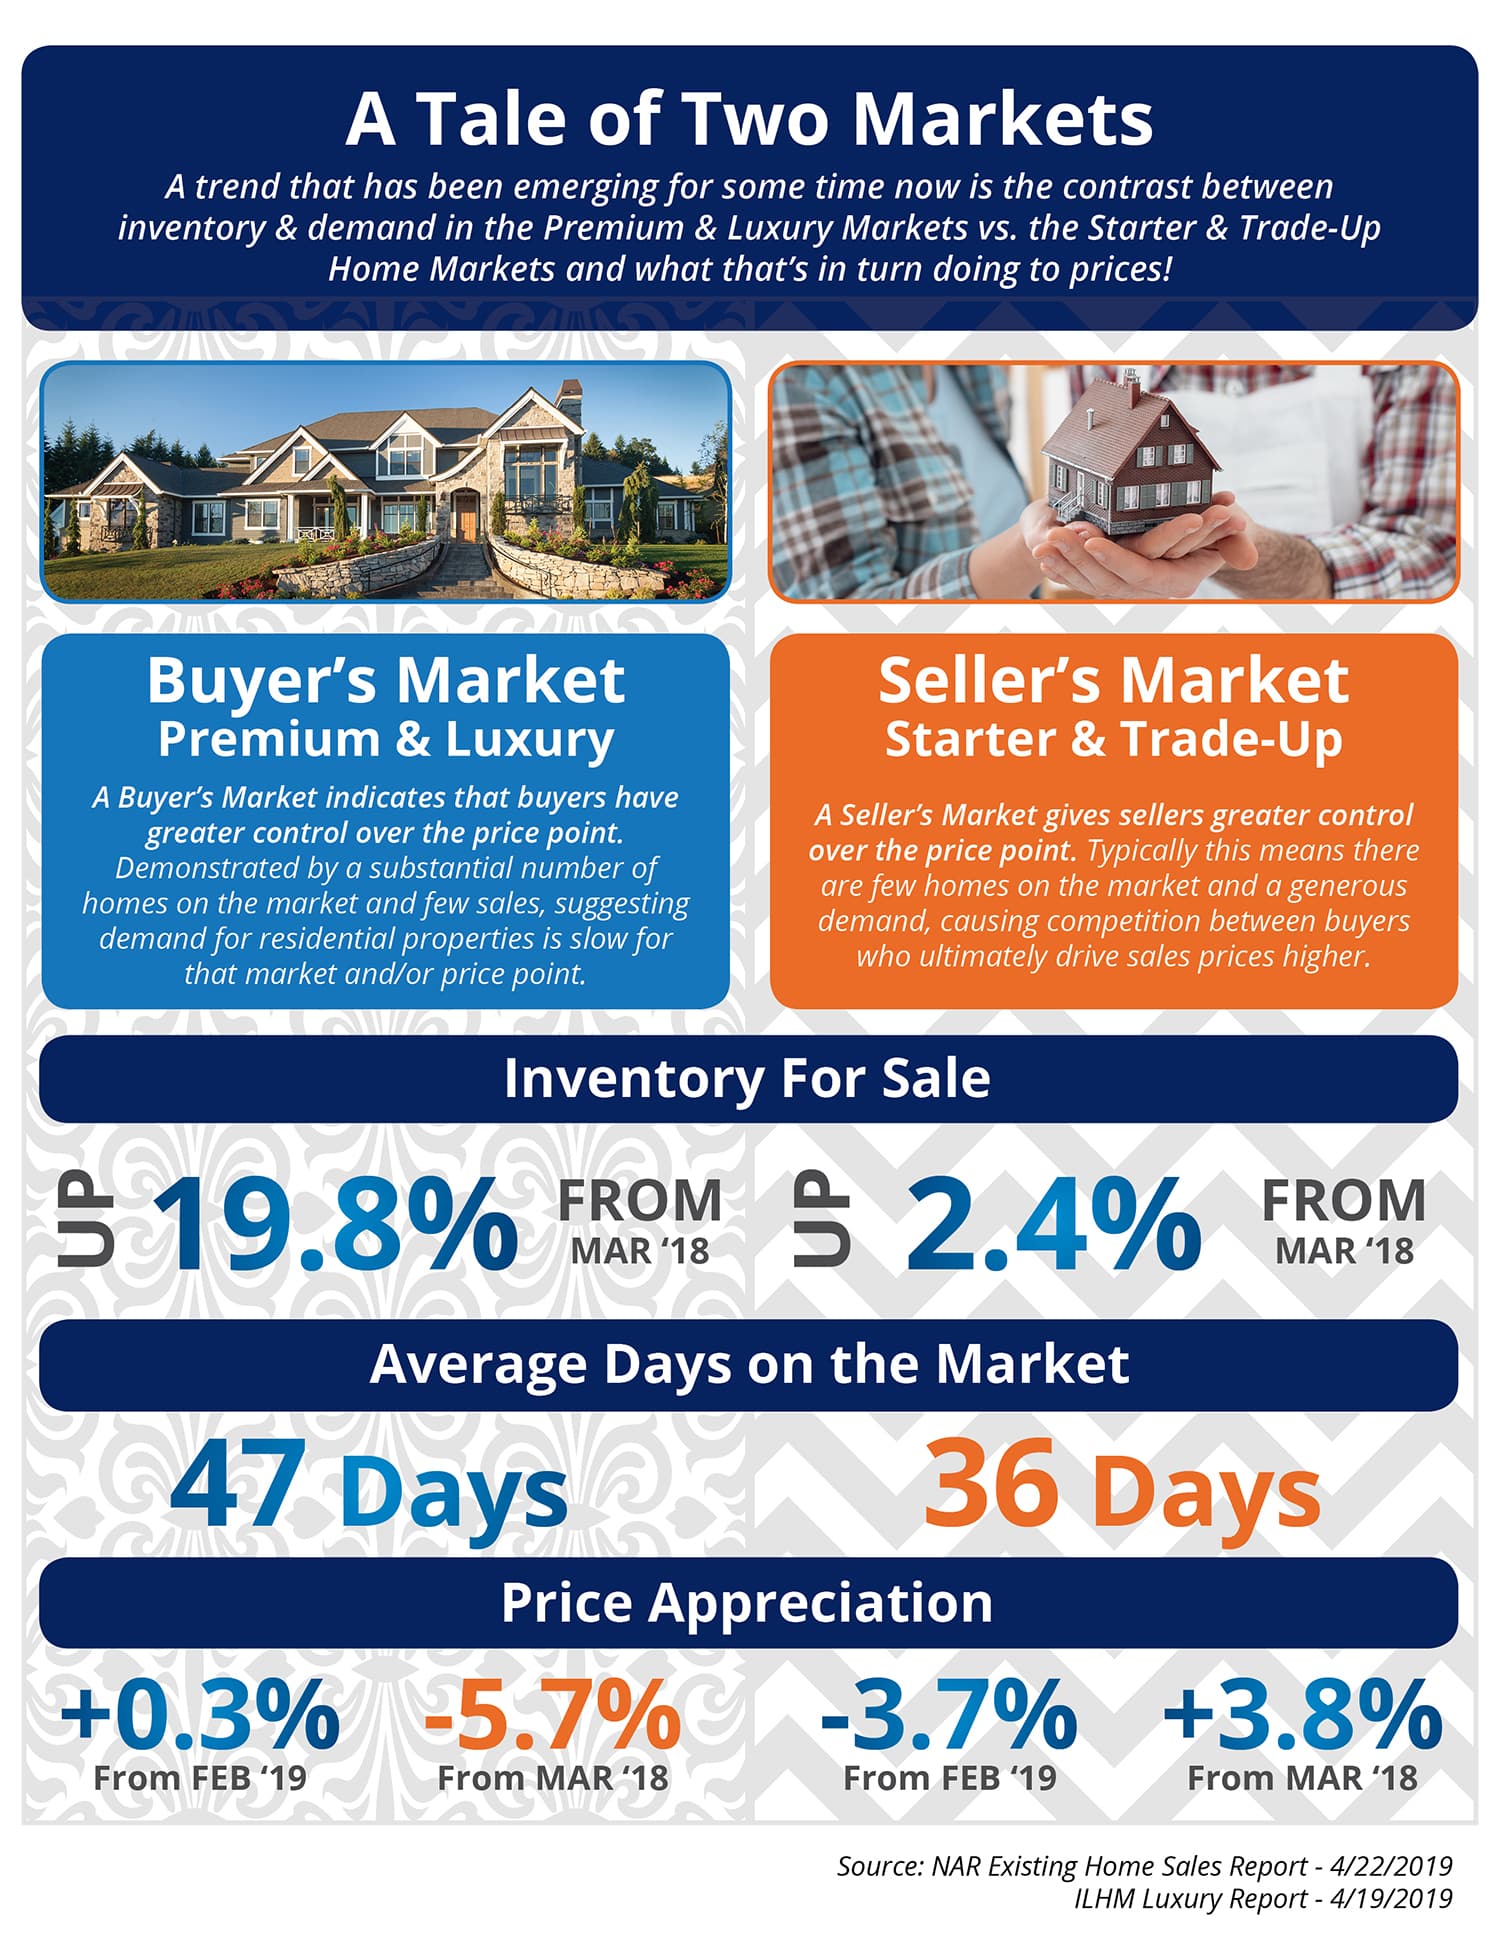 A Tale of Two Markets [INFOGRAPHIC]